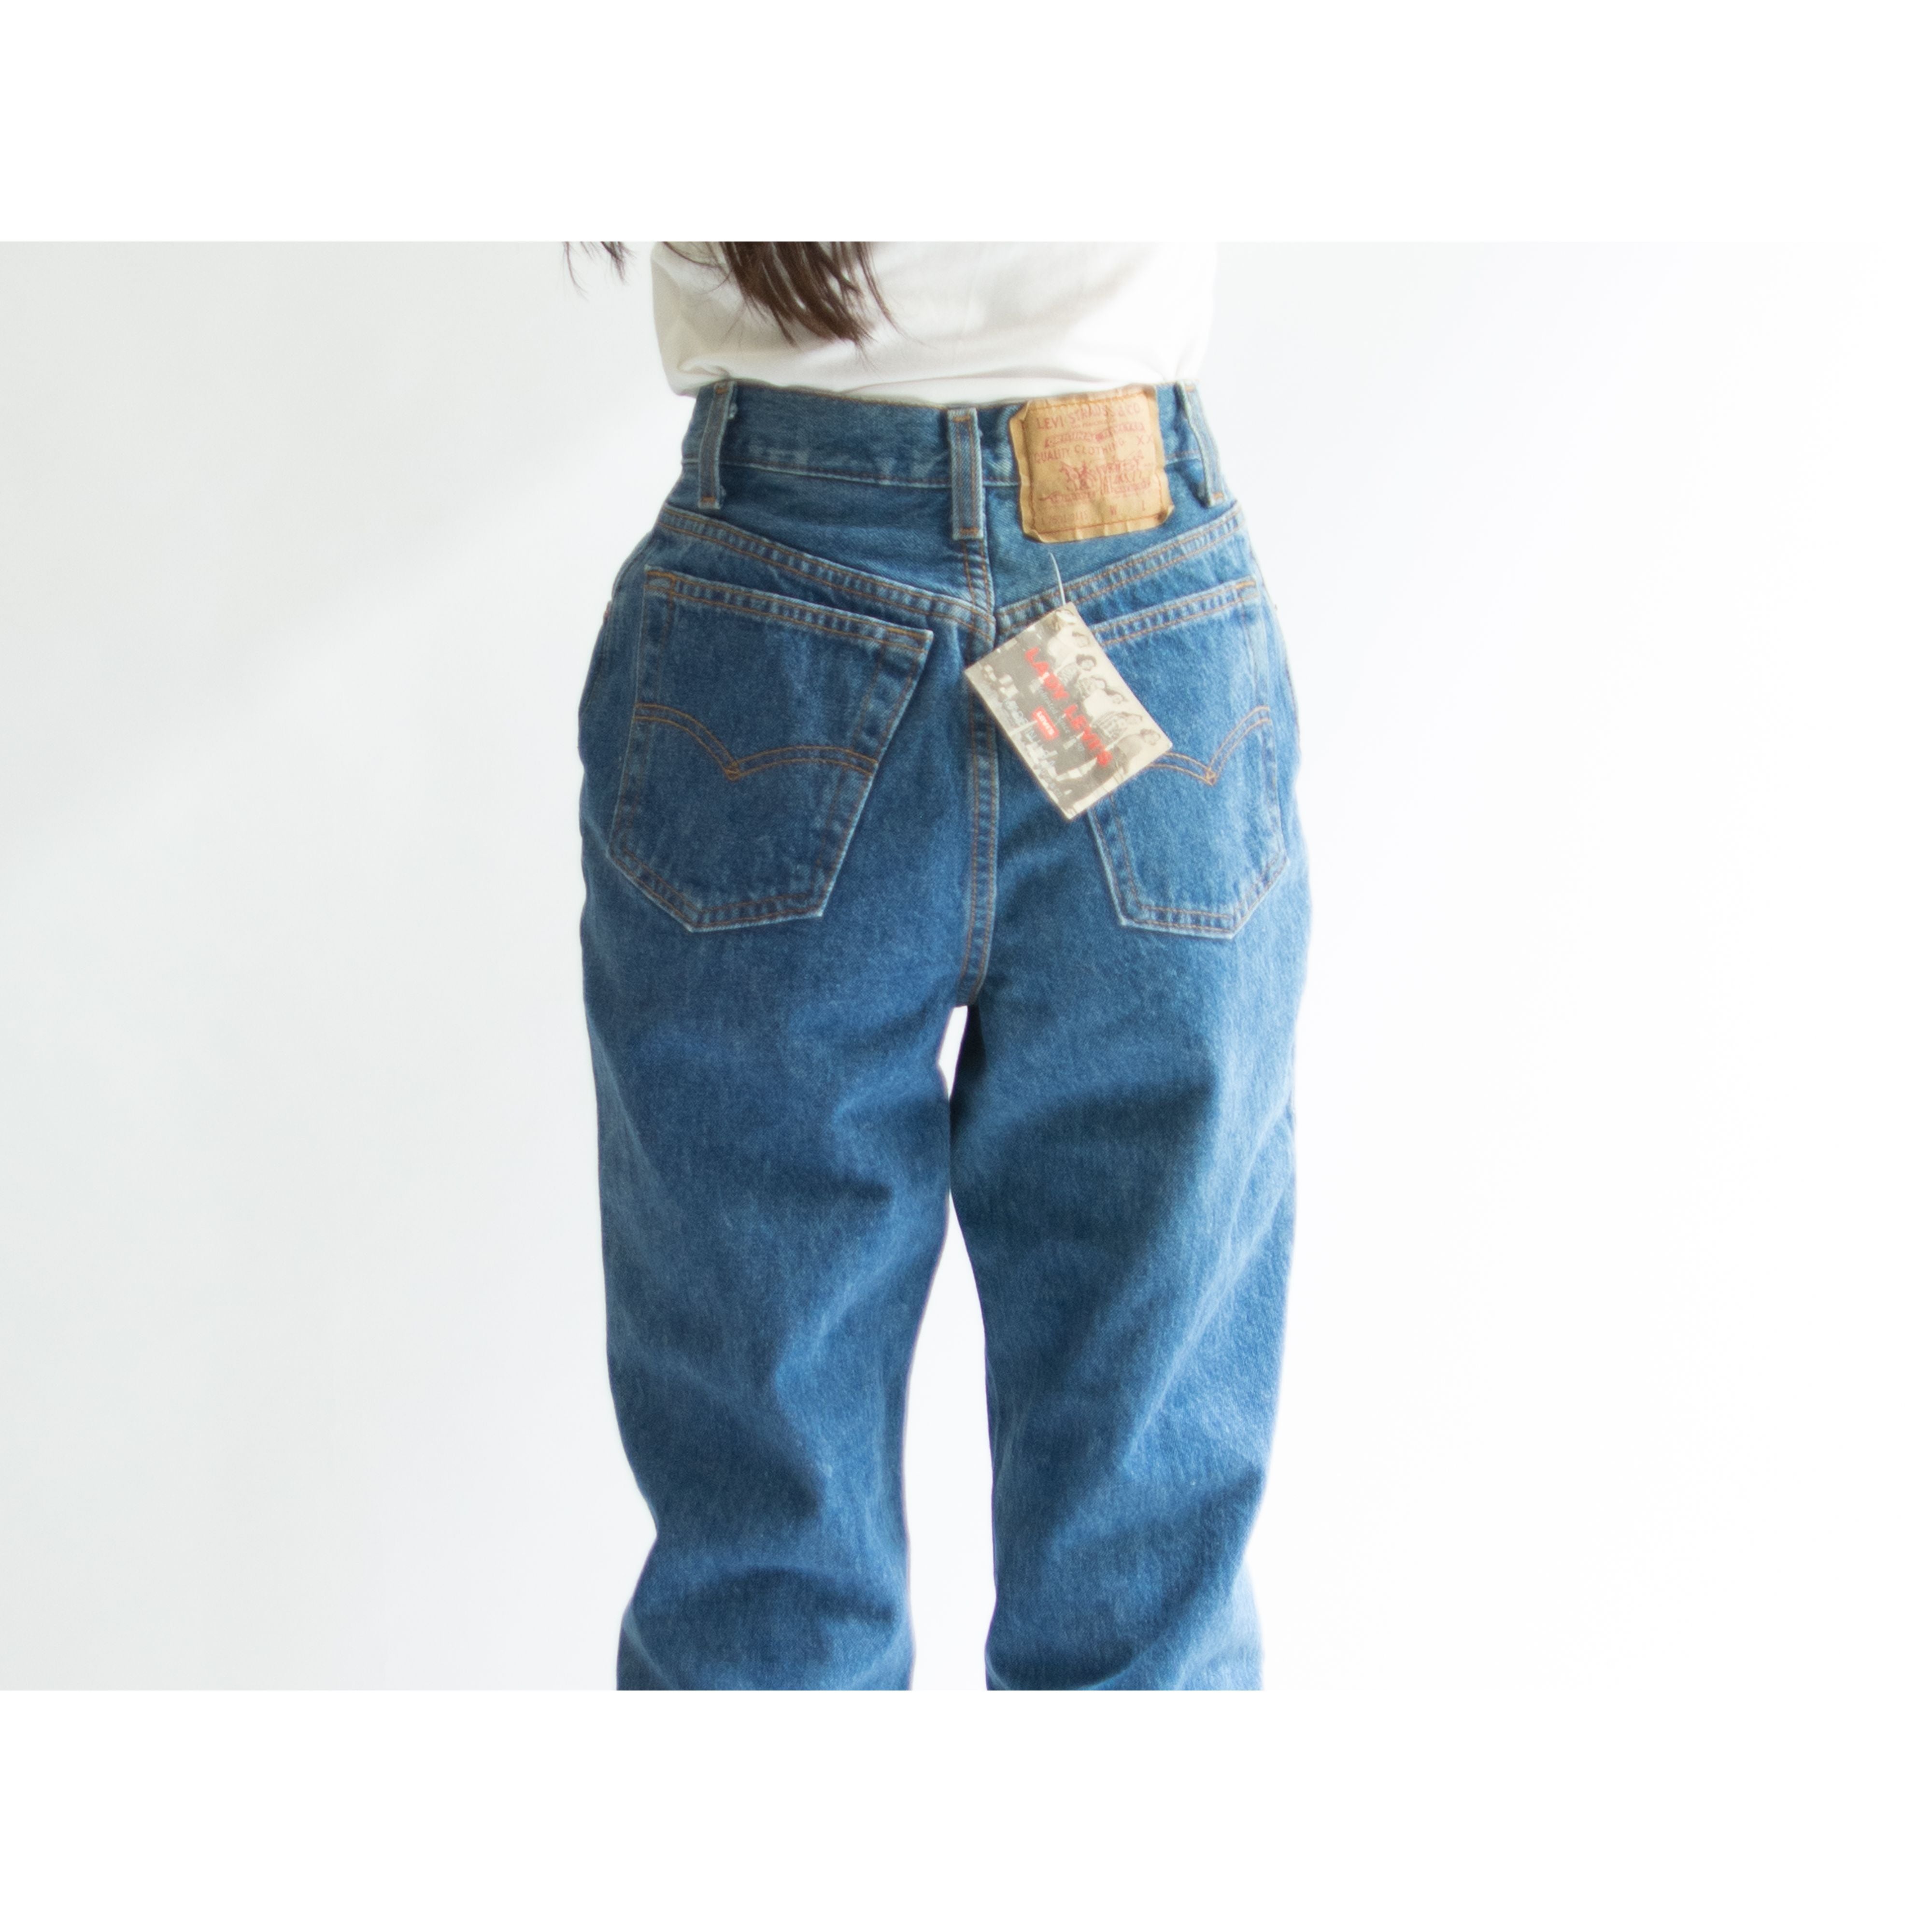 Dead Stock LEVI'S 17501】Made in U.S.A. 90's tapered denim pants